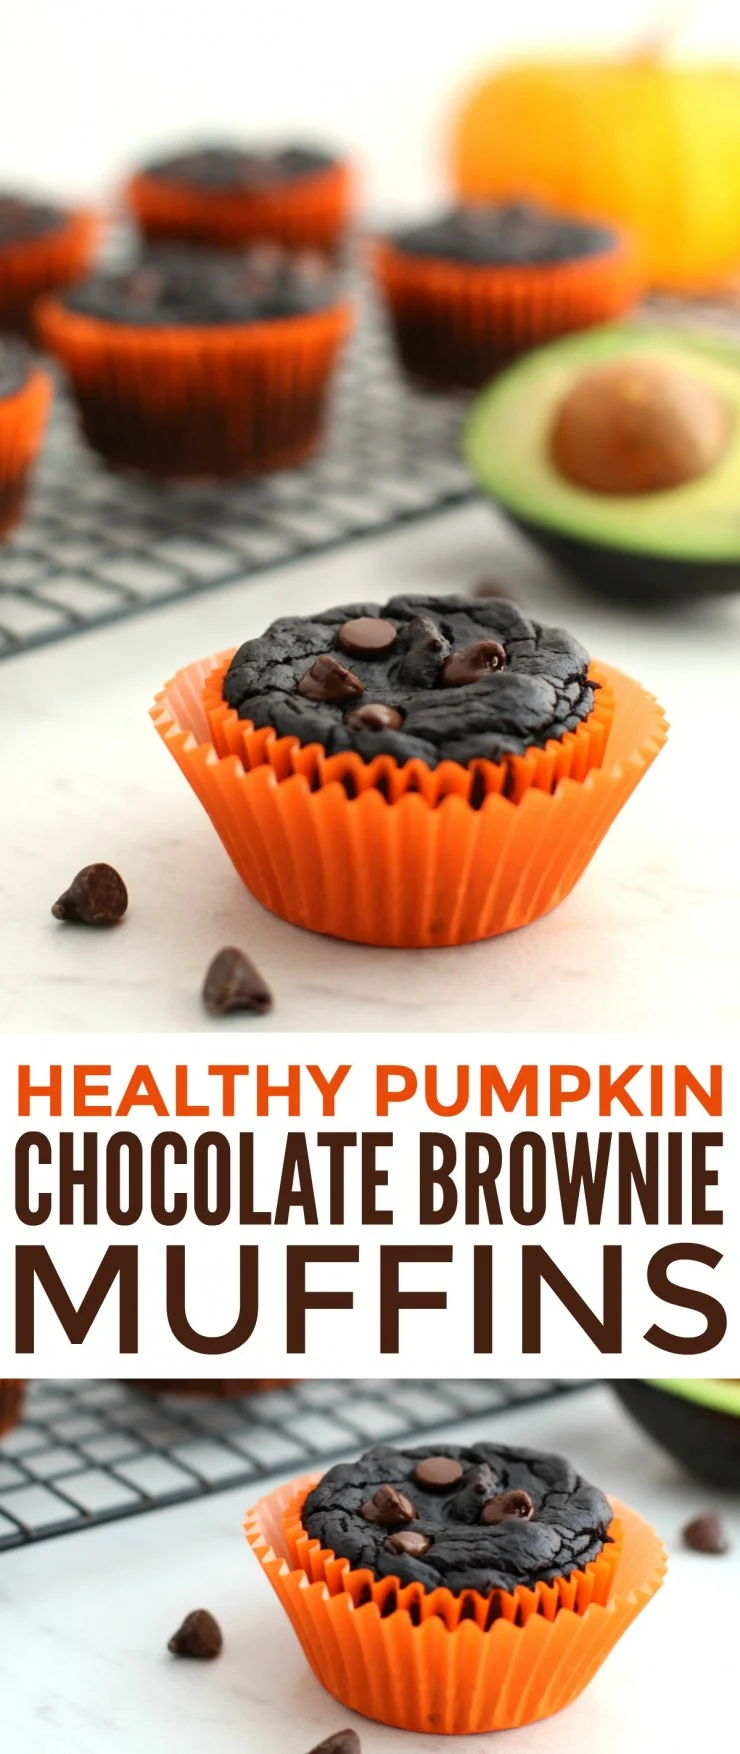 These Healthy Pumpkin Chocolate Brownie Muffins are gluten free, grain free and refined sugar free. The perfect good-for-you fall treat!